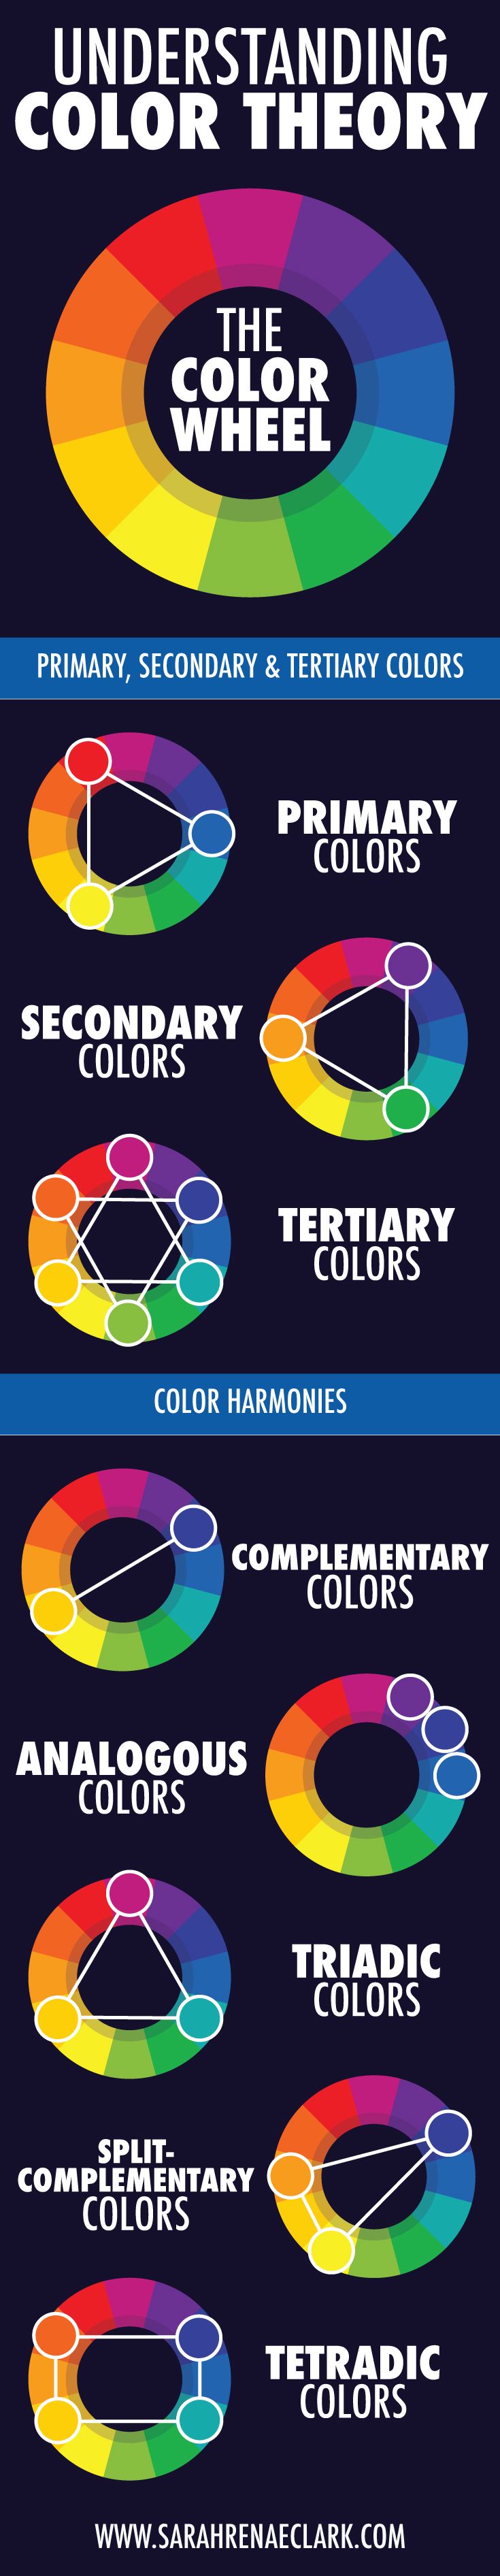 color wheel primary secondary and tertiary colors